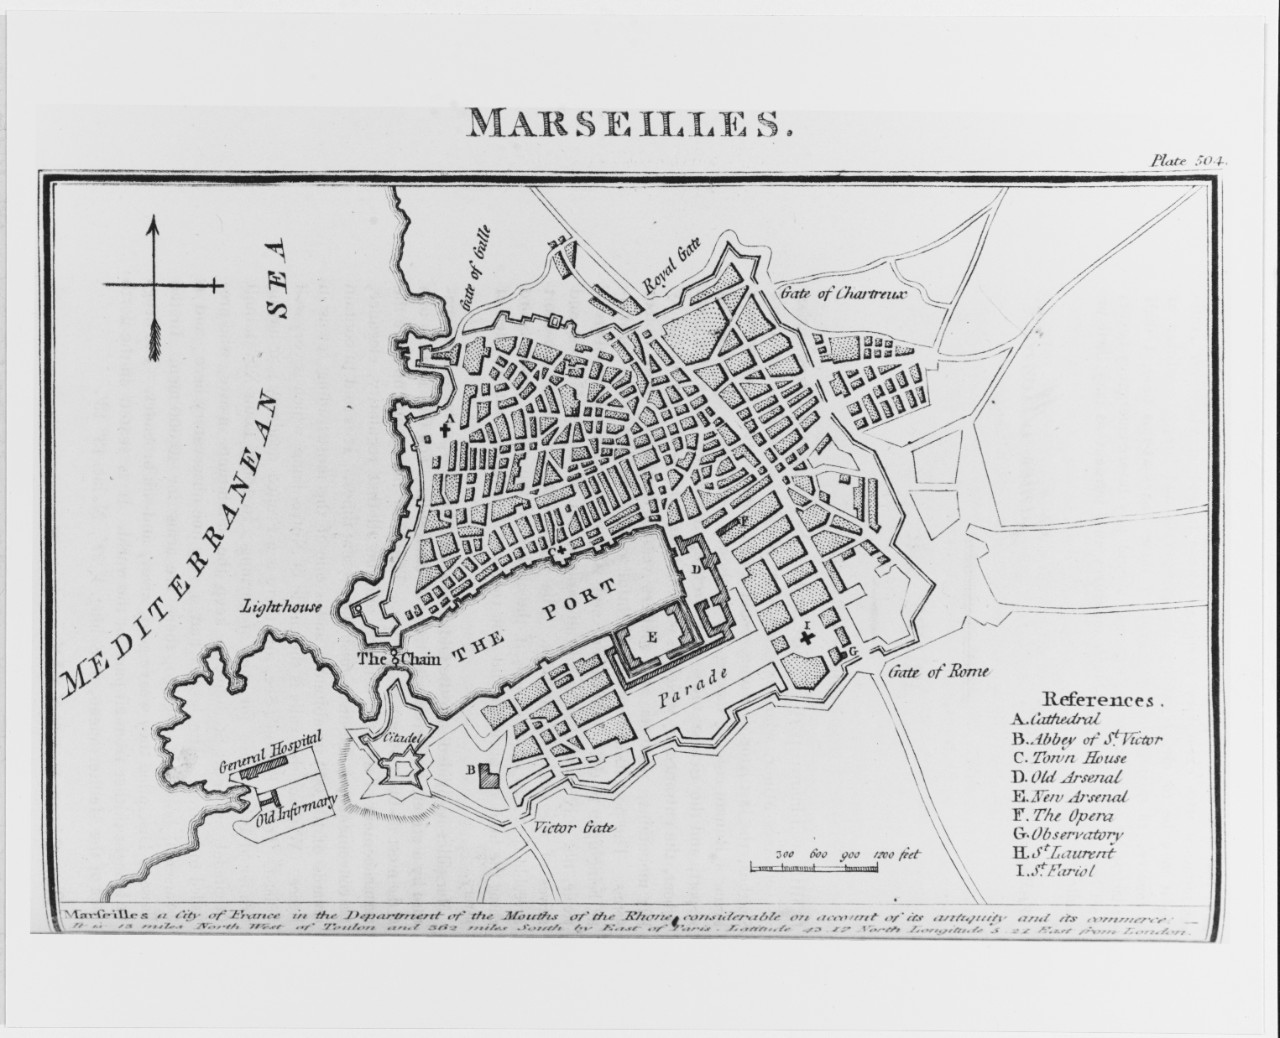 Marseilles, France. Map published in the Naval Chronicle, London, 1818